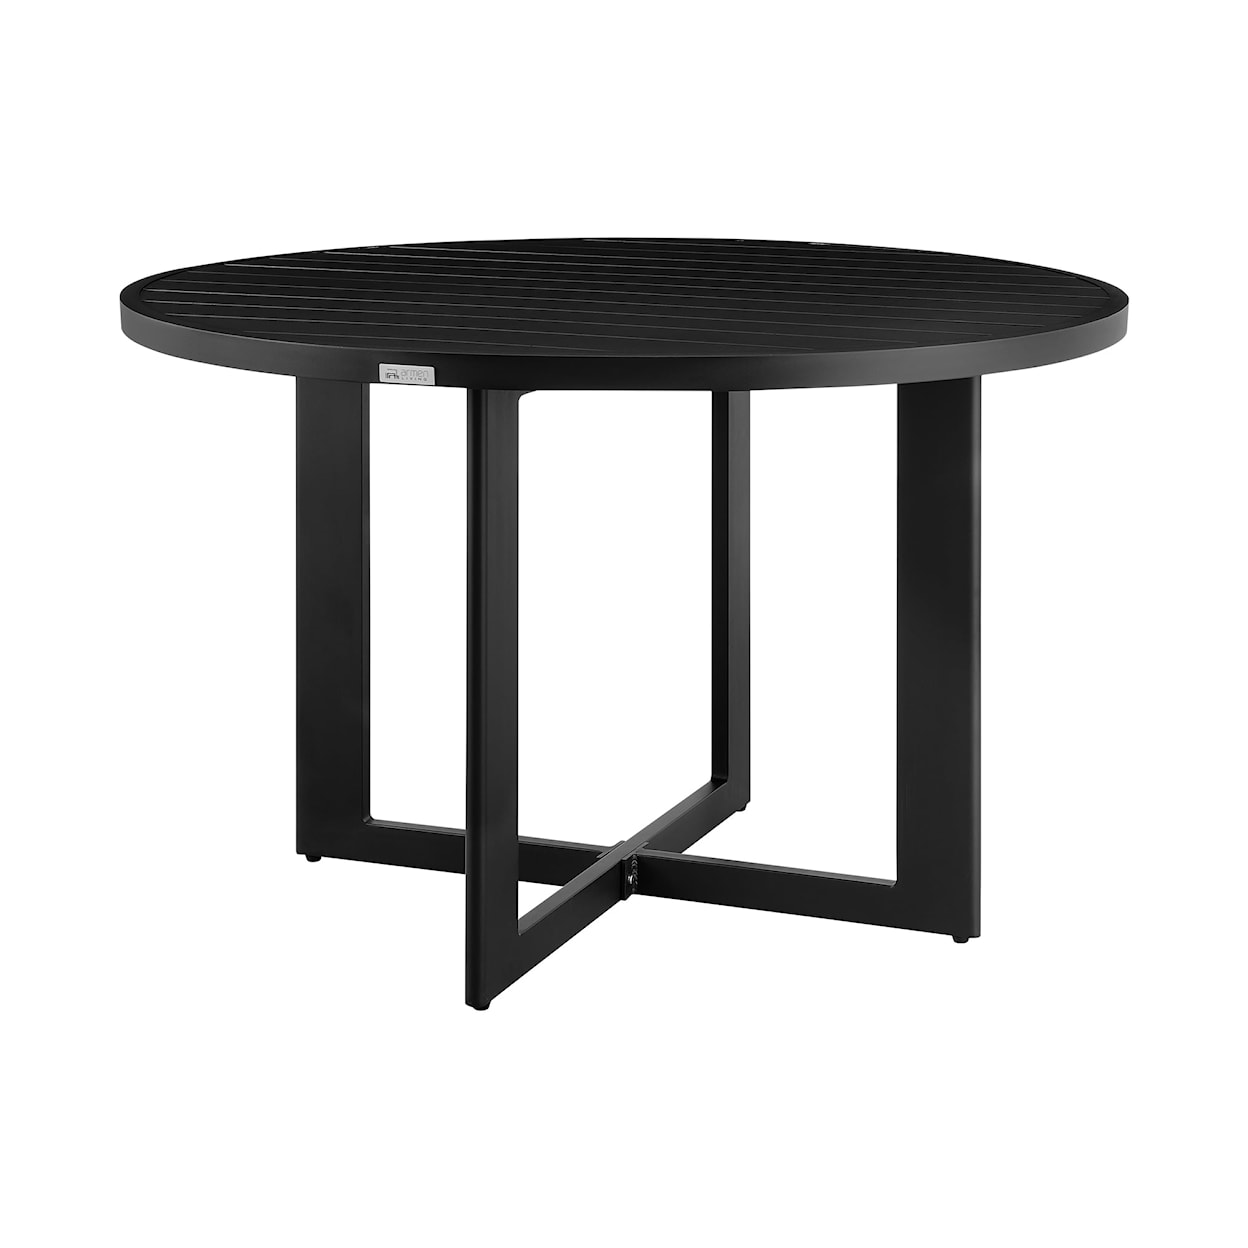 Armen Living Cayman Outdoor Dining Table